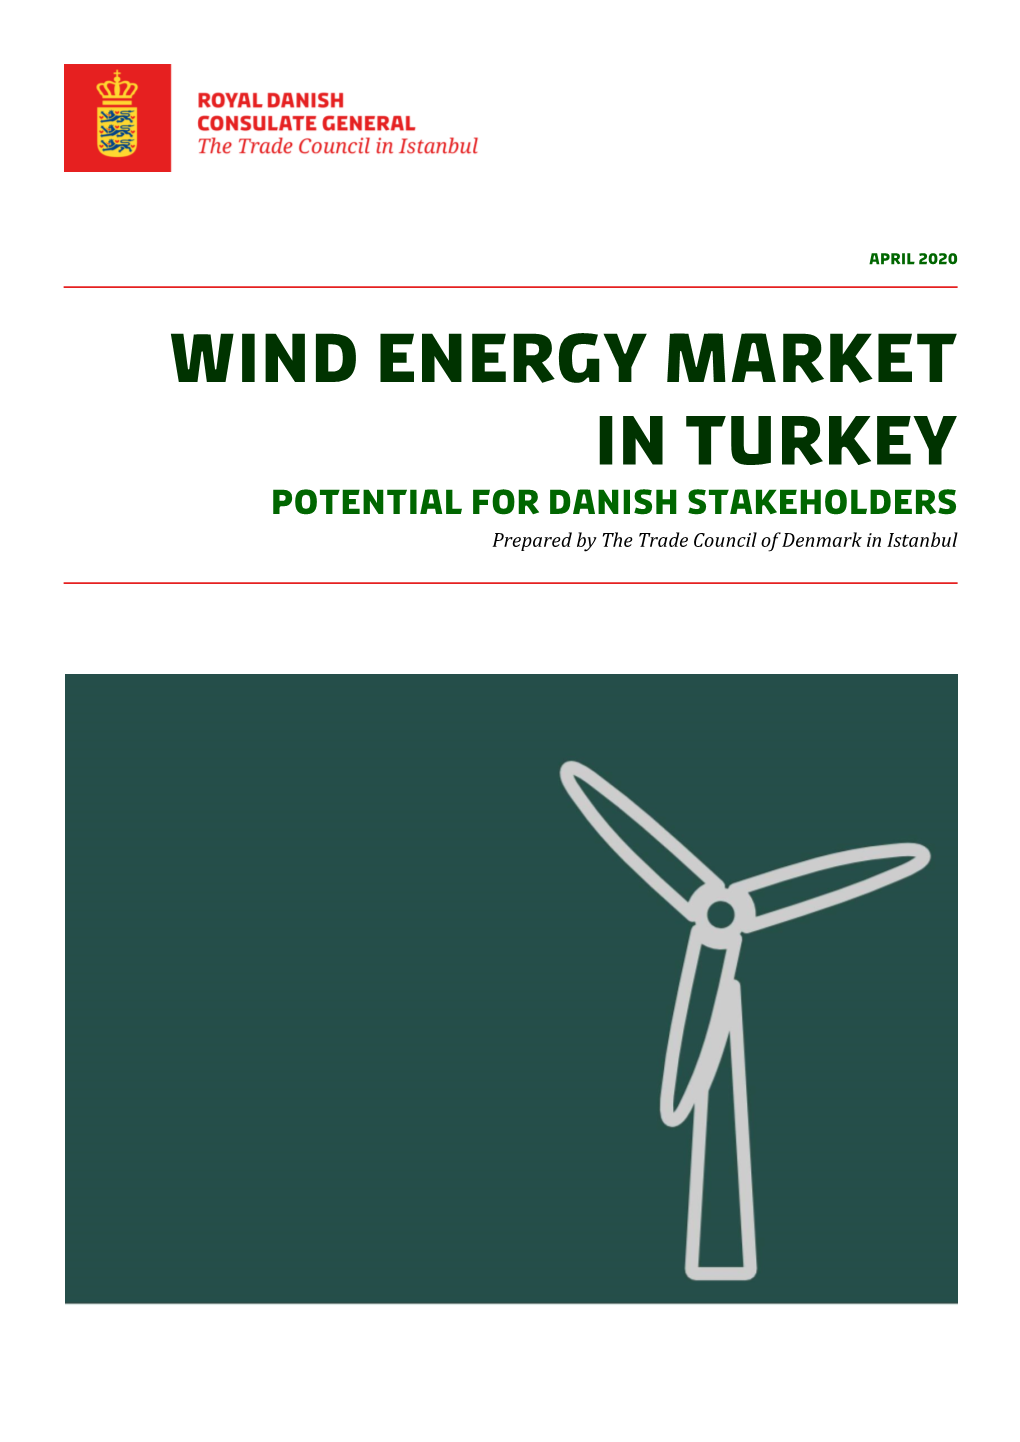 WIND ENERGY MARKET in TURKEY POTENTIAL for DANISH STAKEHOLDERS Prepared by the Trade Council of Denmark in Istanbul